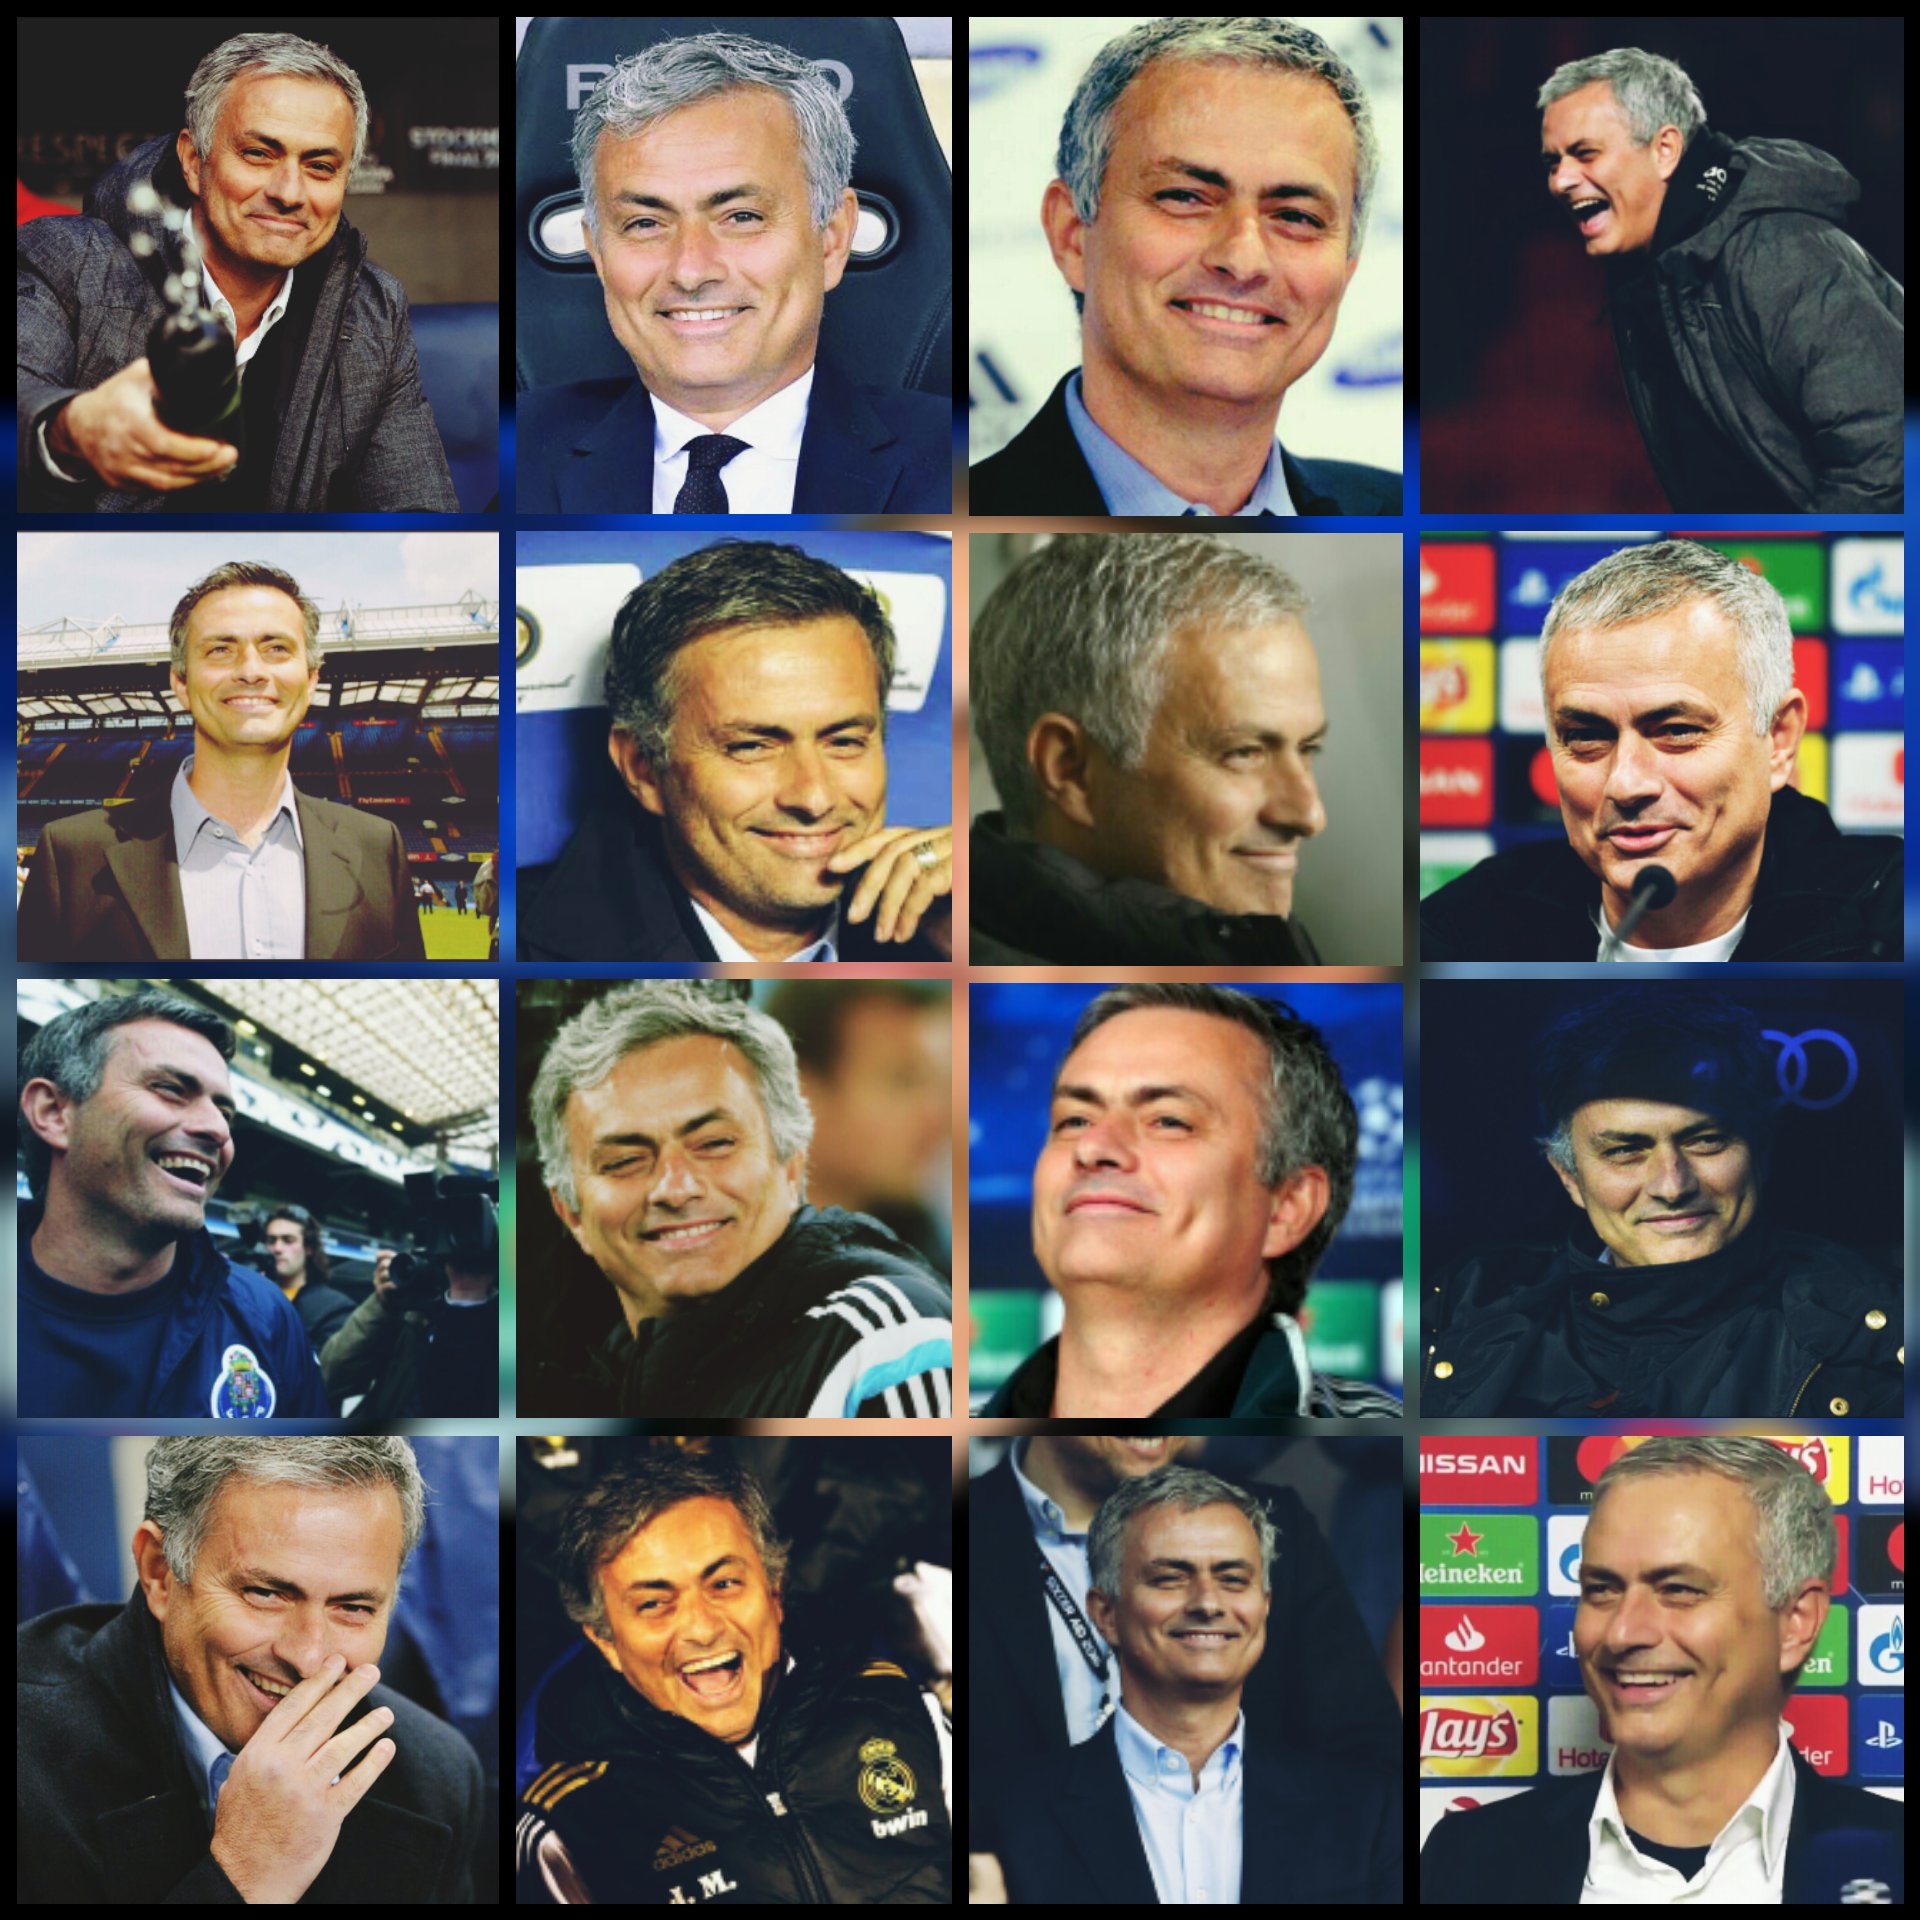 Happy 56th Birthday to Jose Mourinho the best manager I have ever seen. 

May the smile never leaves his face. 